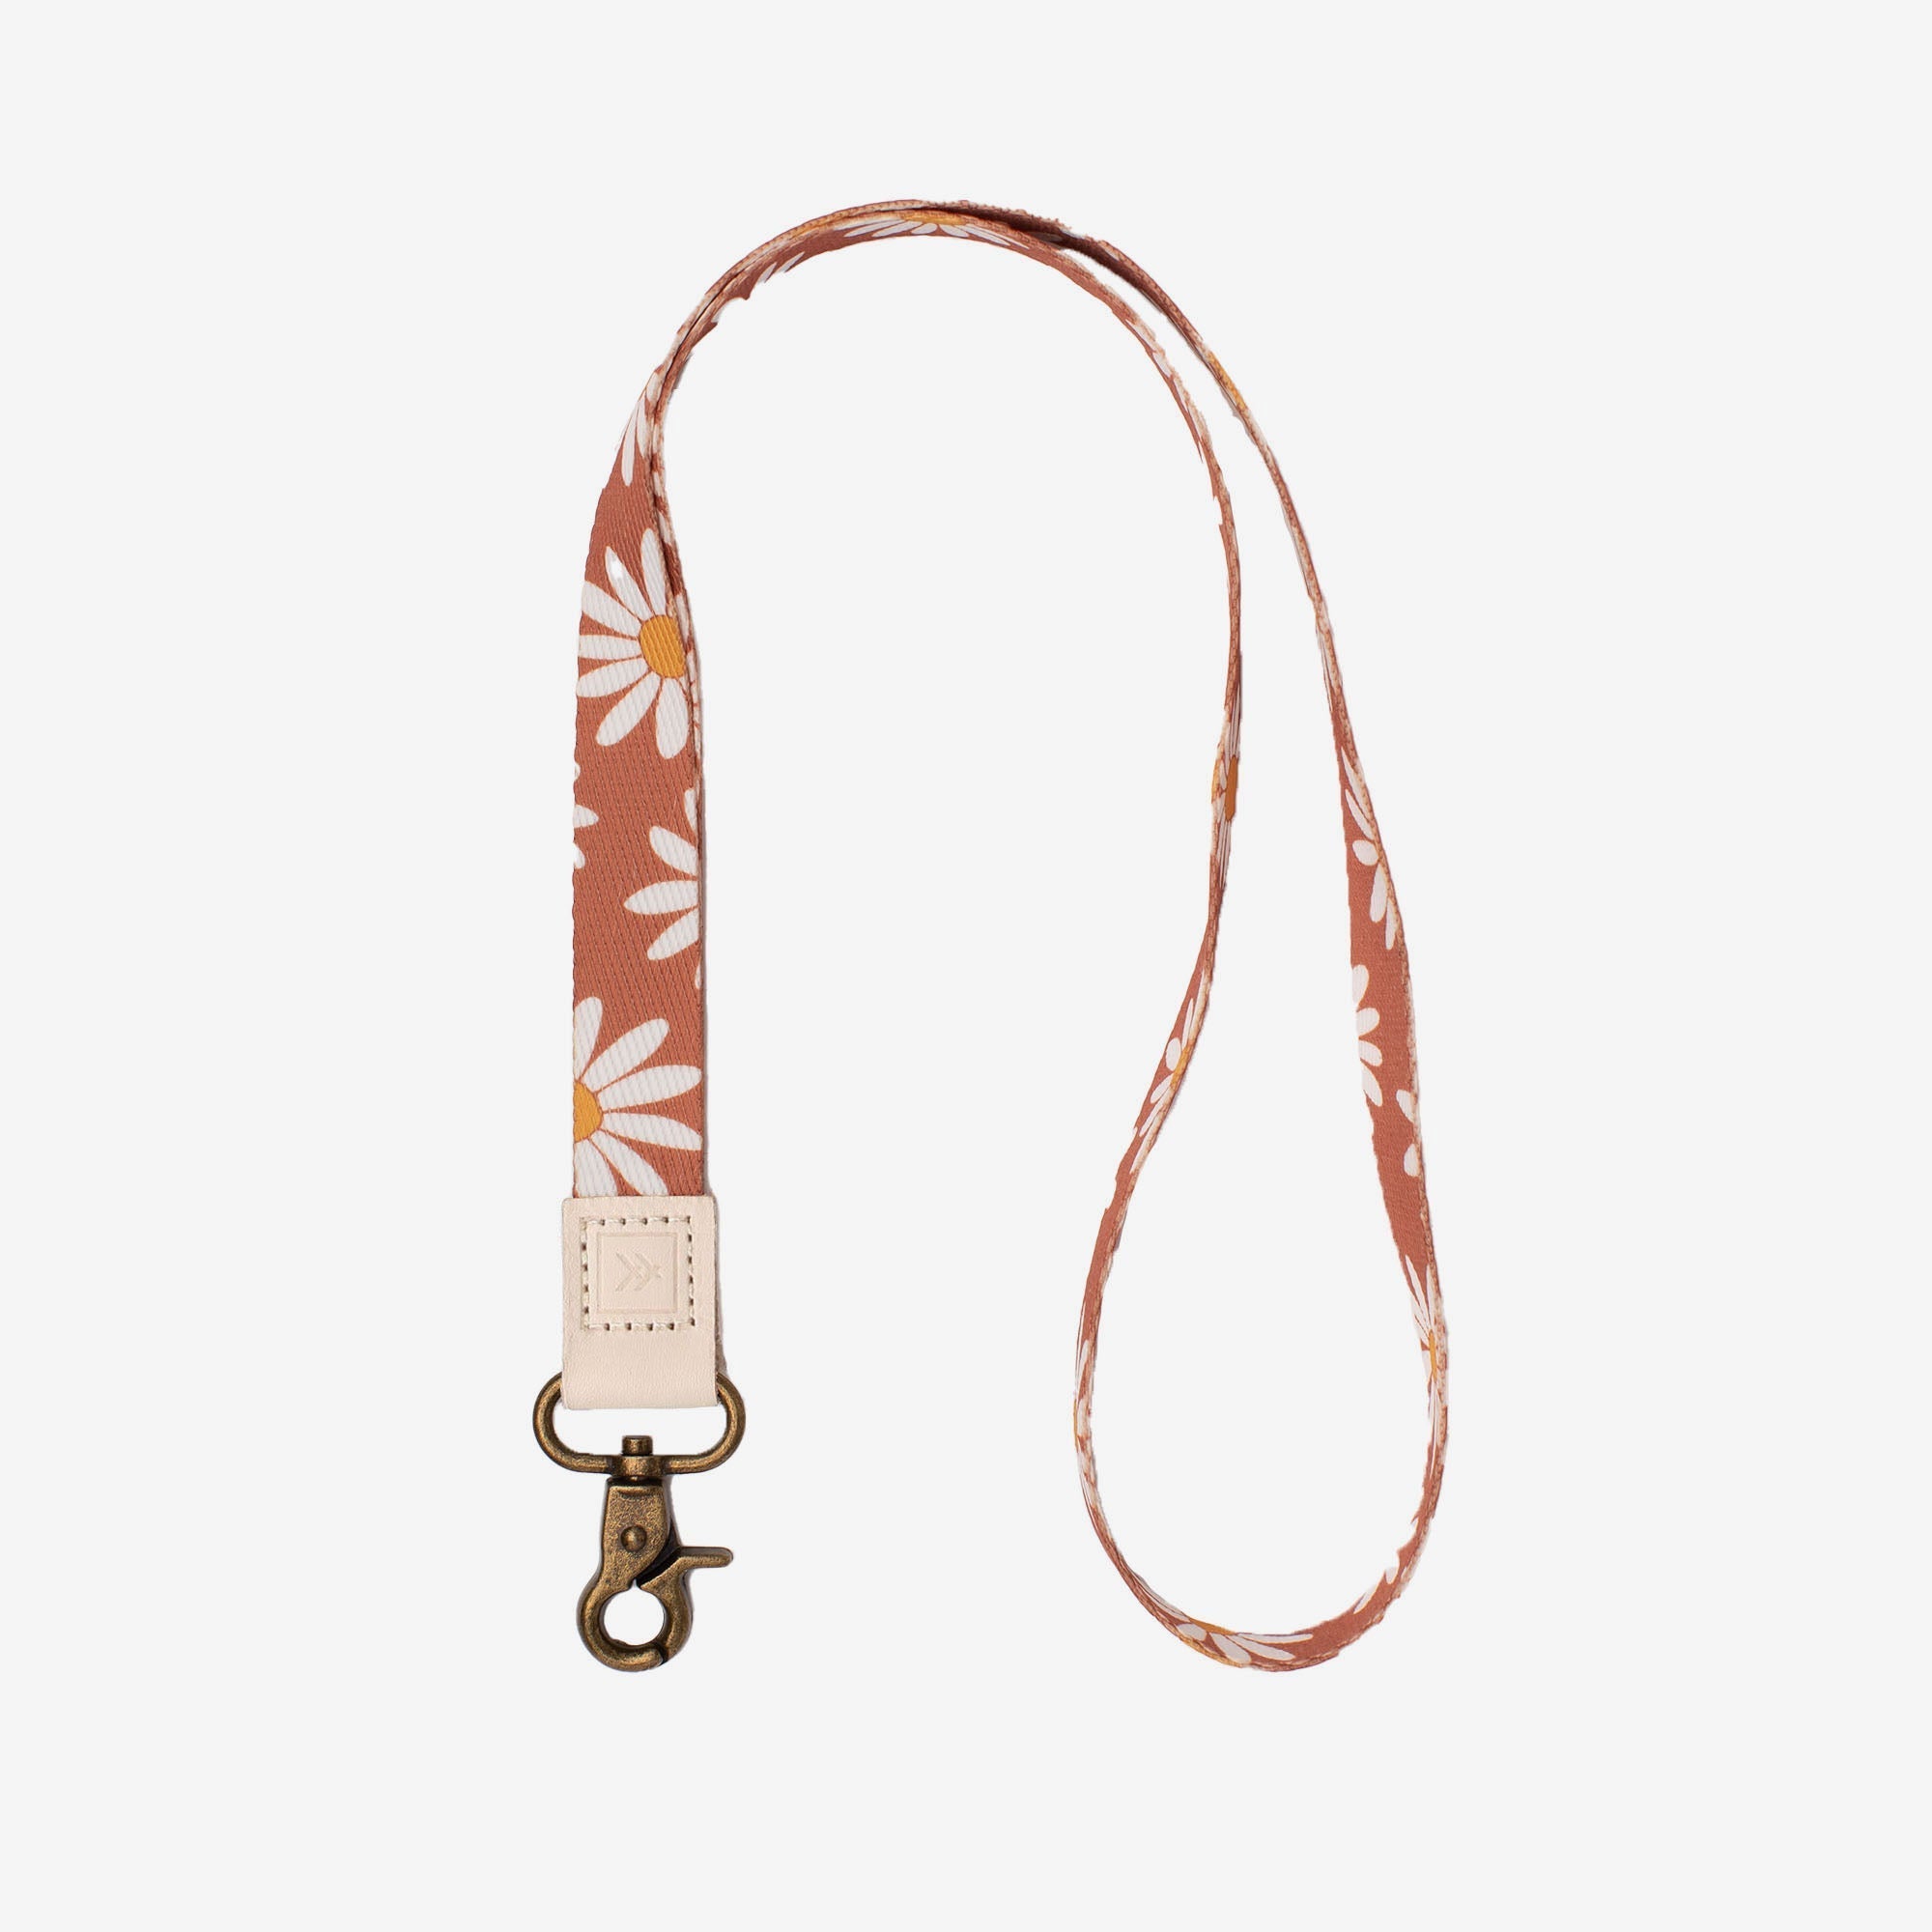 floral white and brown wrist lanyard